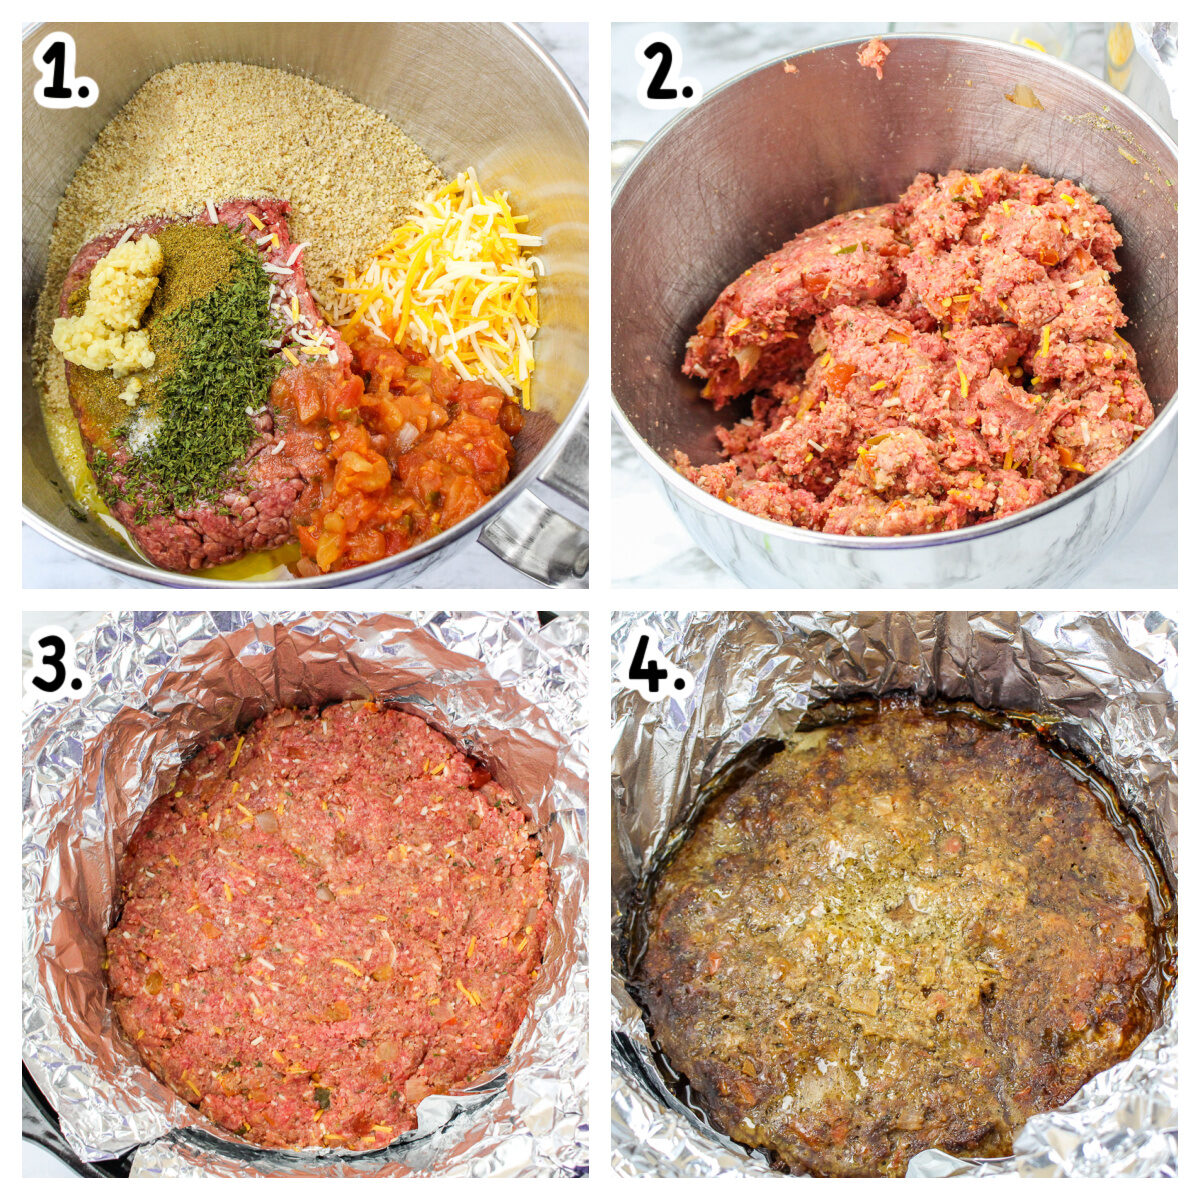 4 images about how to prepare salsa meatloaf in slow cooker.